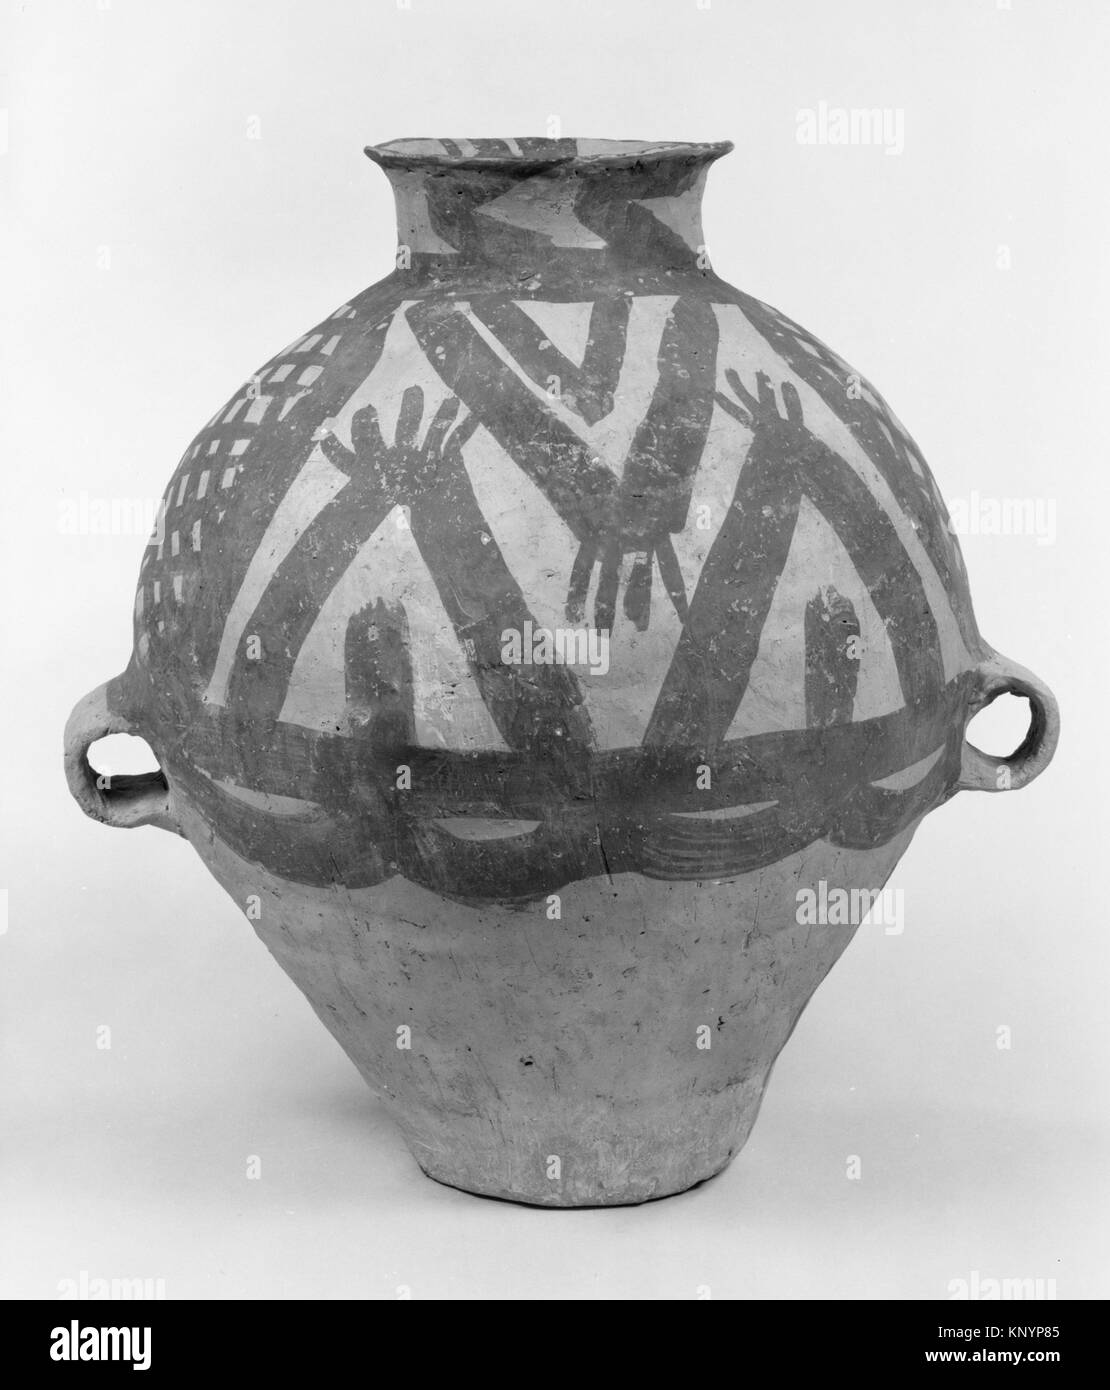 Jar (Guan). Period: Neolithic, Majiayao Yangshao, Machang phase; Date: ca. 2300-2000 B.C; Culture: China; Medium: Earthenware with painted Stock Photo